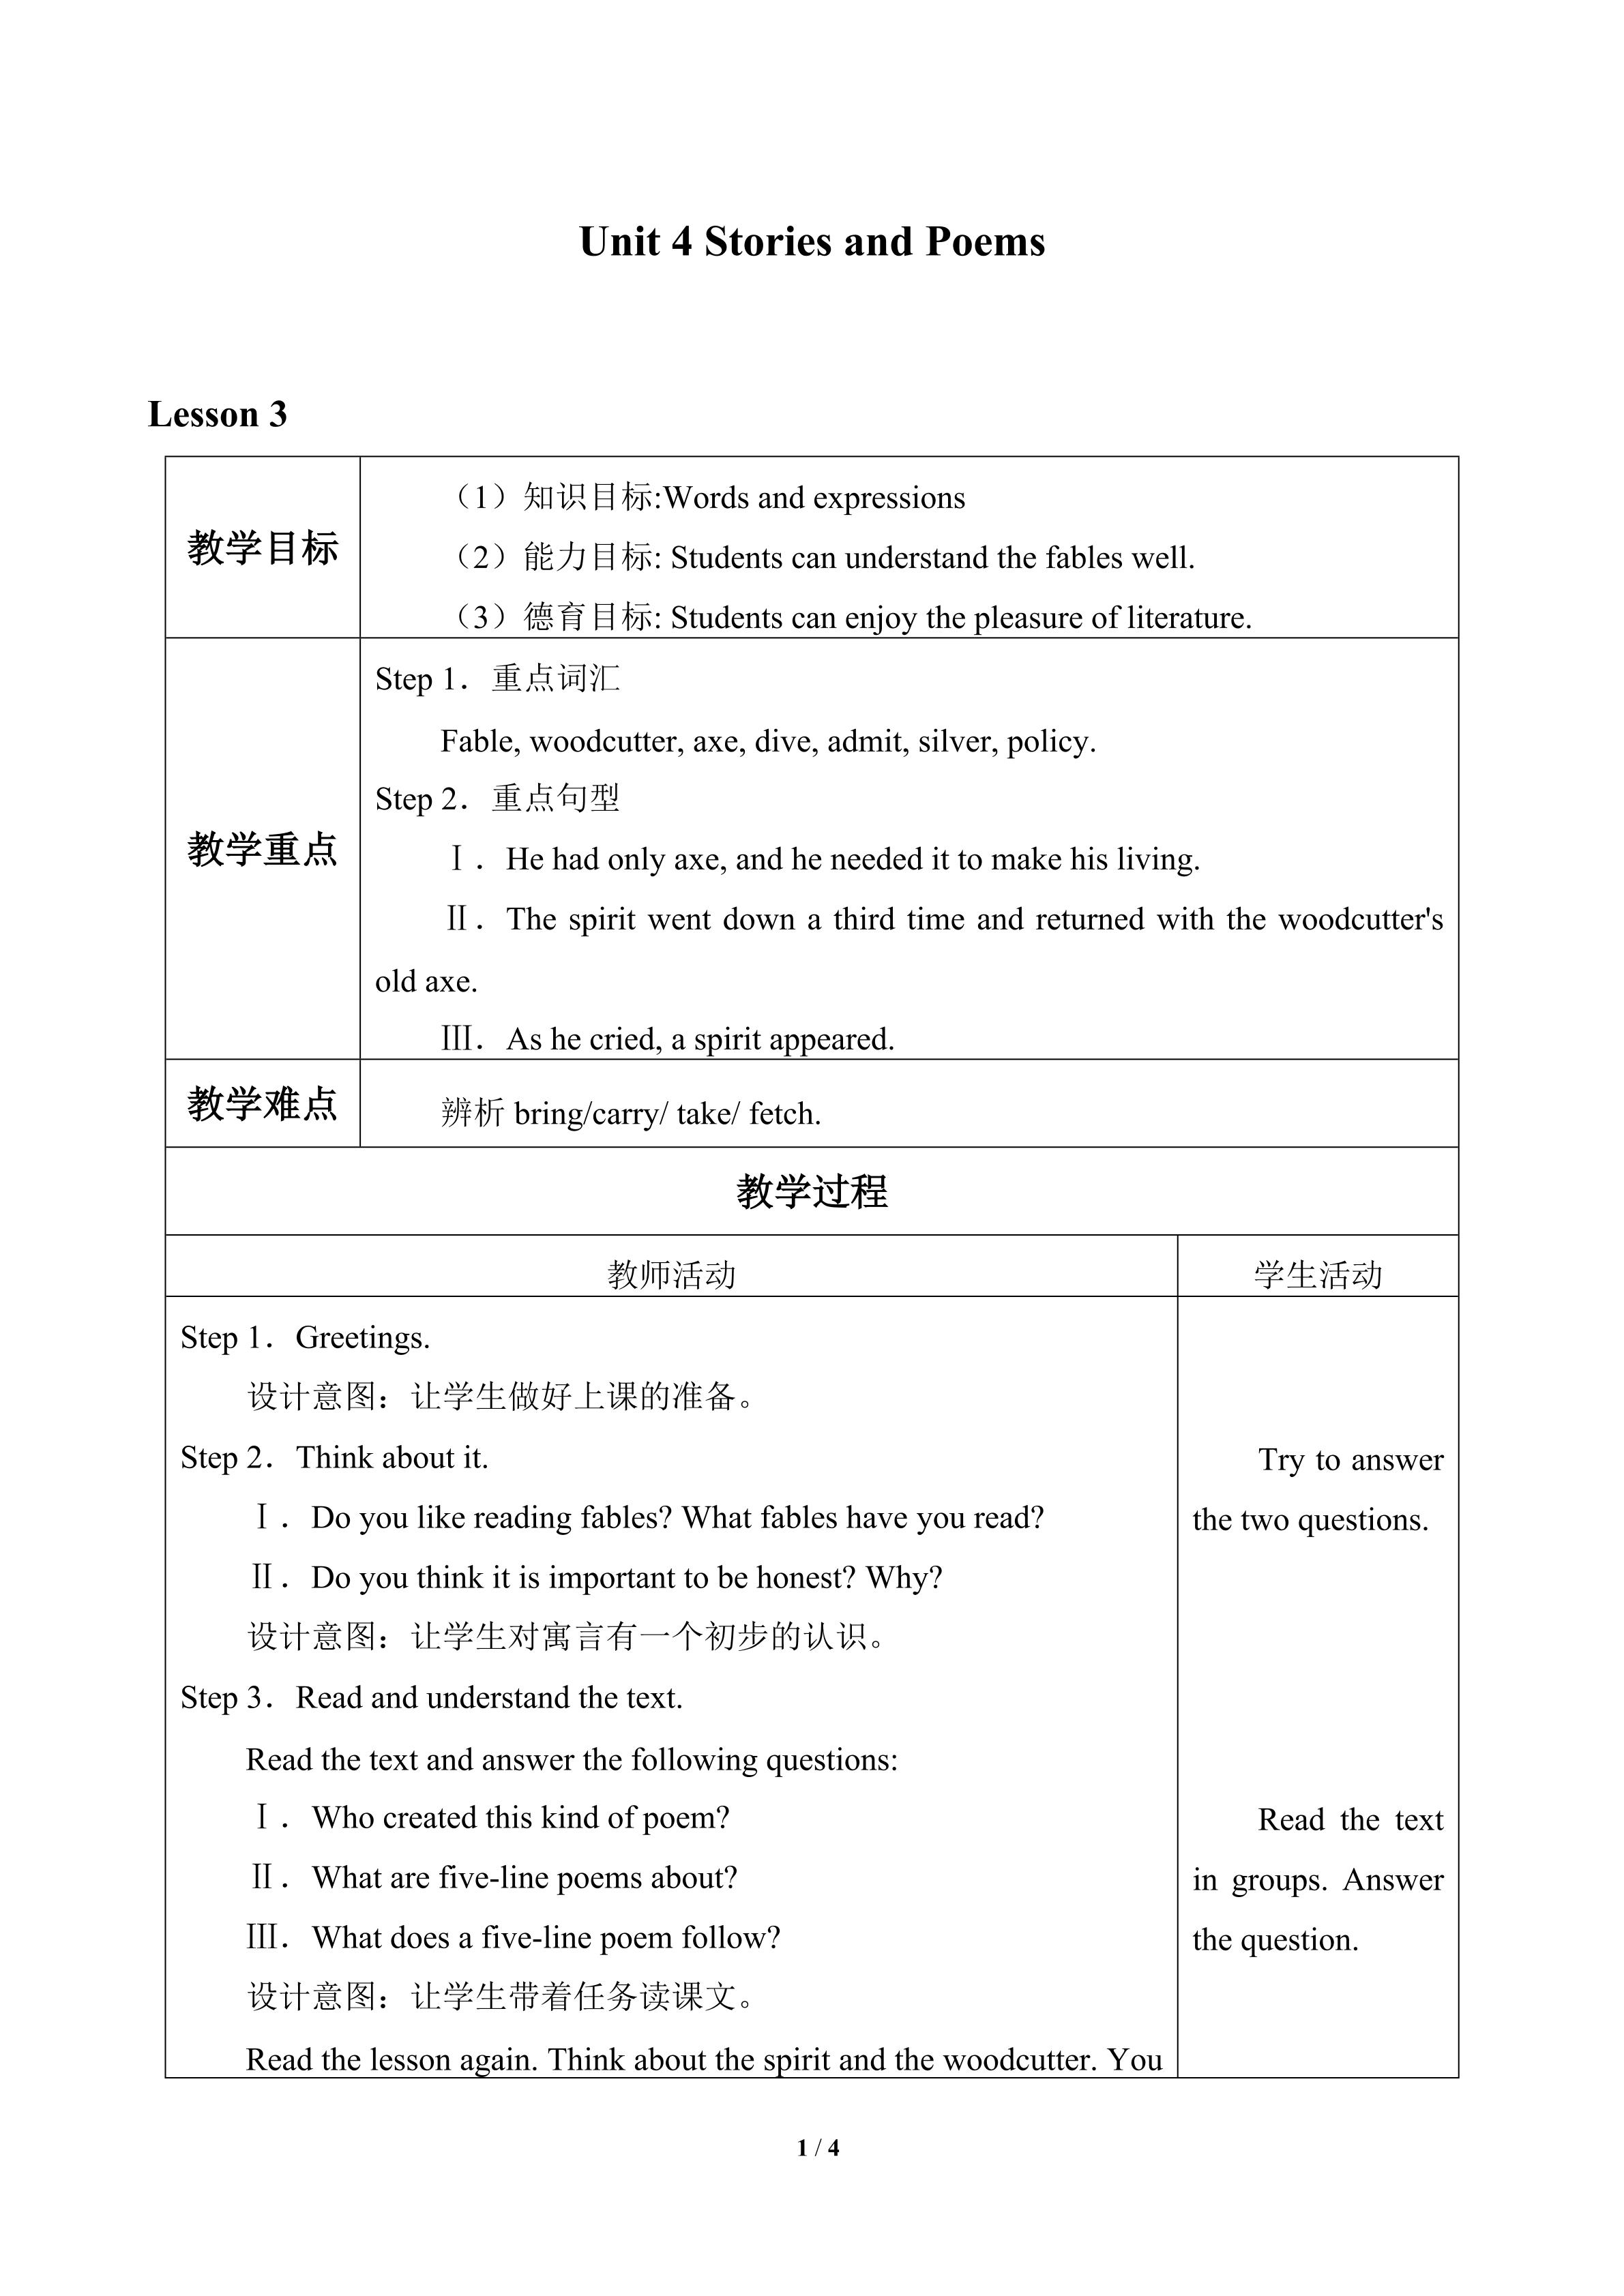 Unit 4 Stories and Poems_教案3